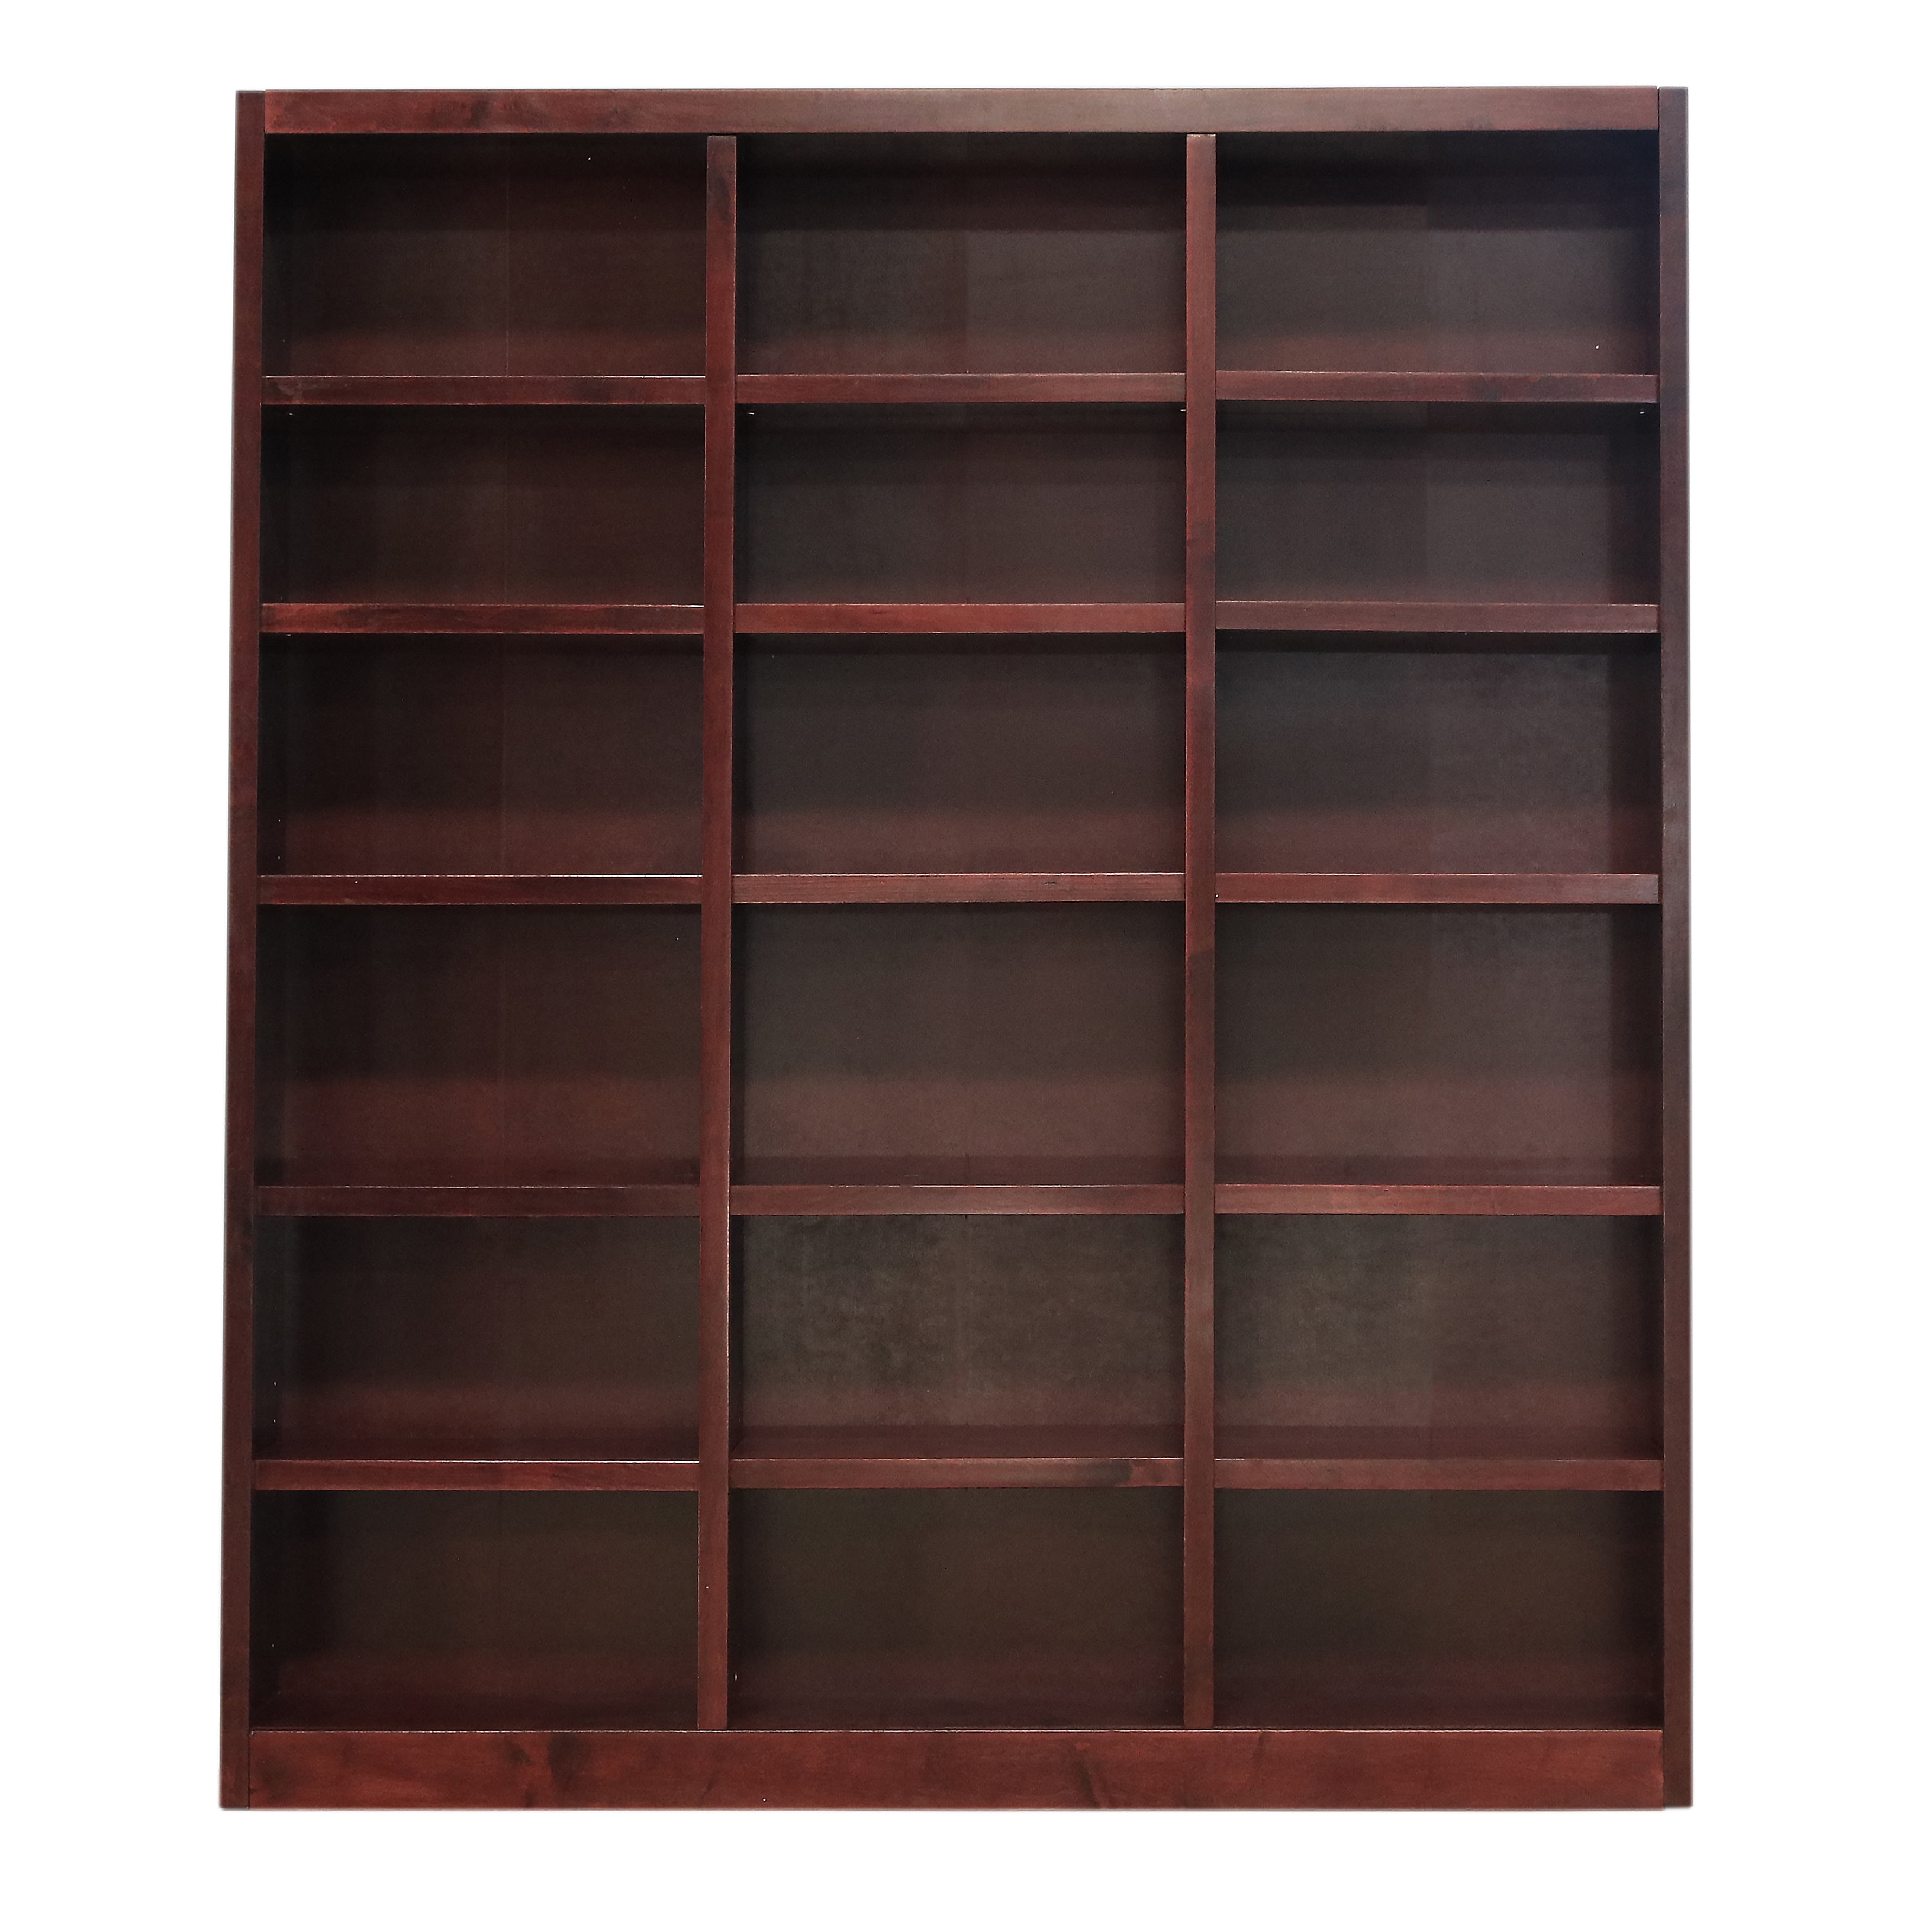 Mainstays 31 3 Shelf Bookcase With, 90 Inch Tall White Bookcase